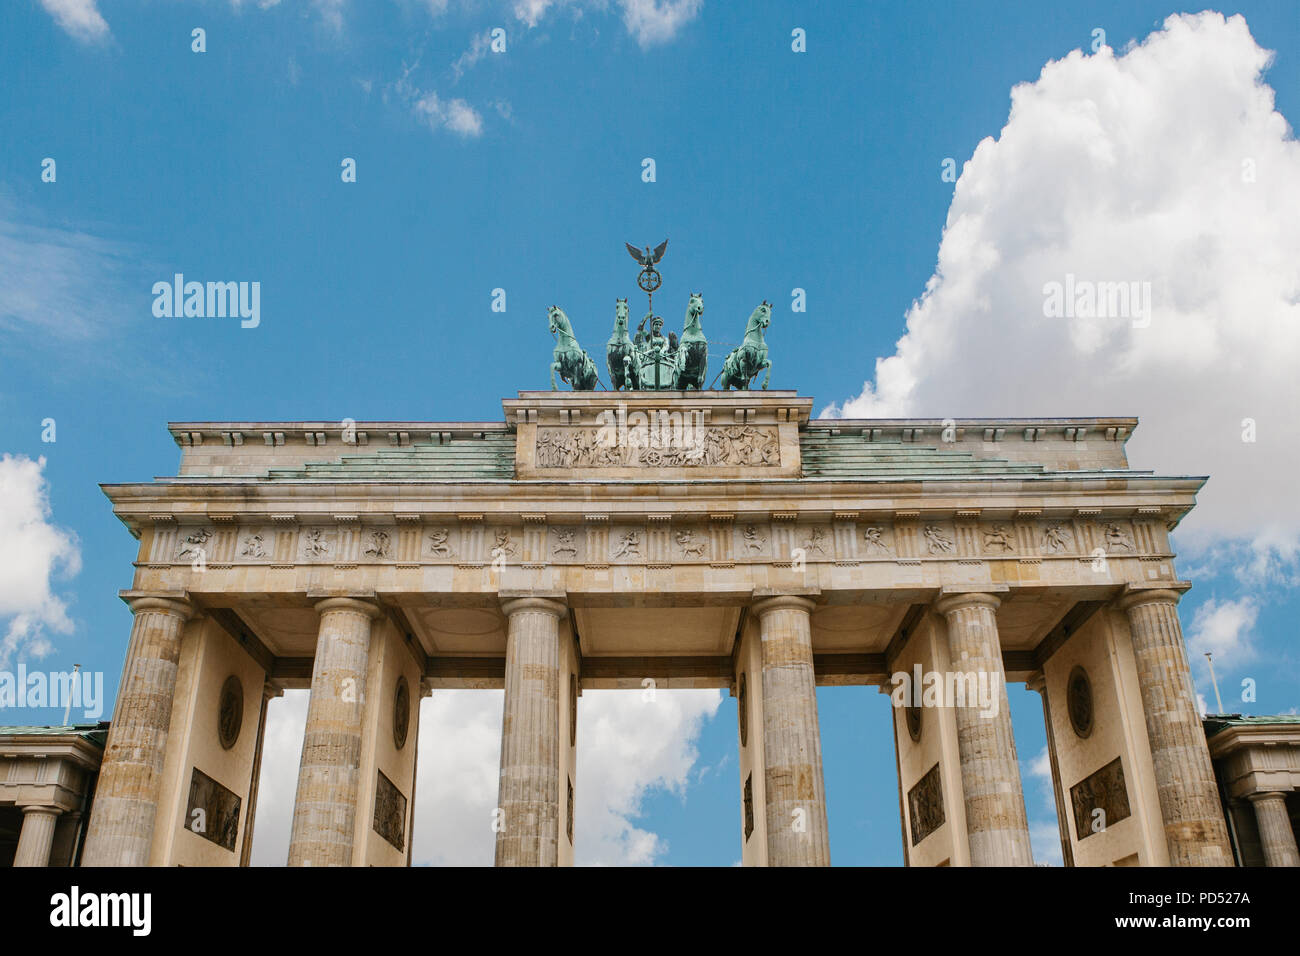 Brandenburg gate in Berlin, Germany. Architectural monument in historic center of Berlin. Symbol and monument of architecture Stock Photo